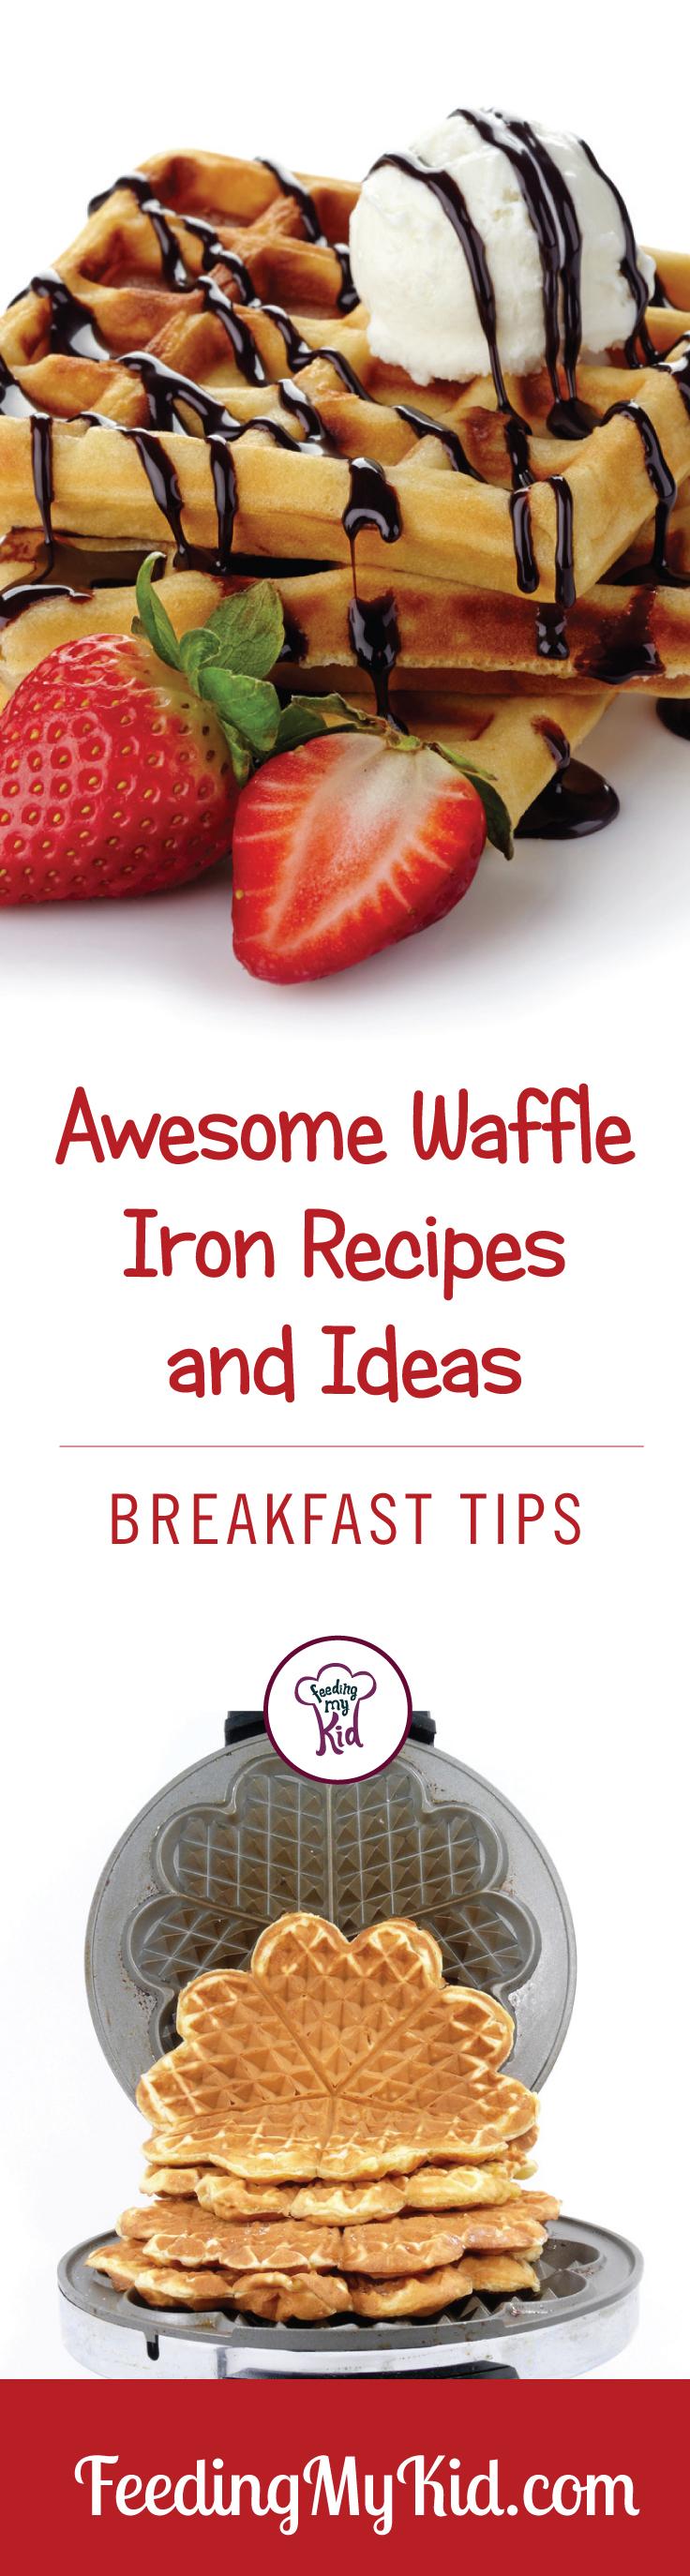 Awesome Waffle Iron Recipes and Ideas. Breakfast Tips.